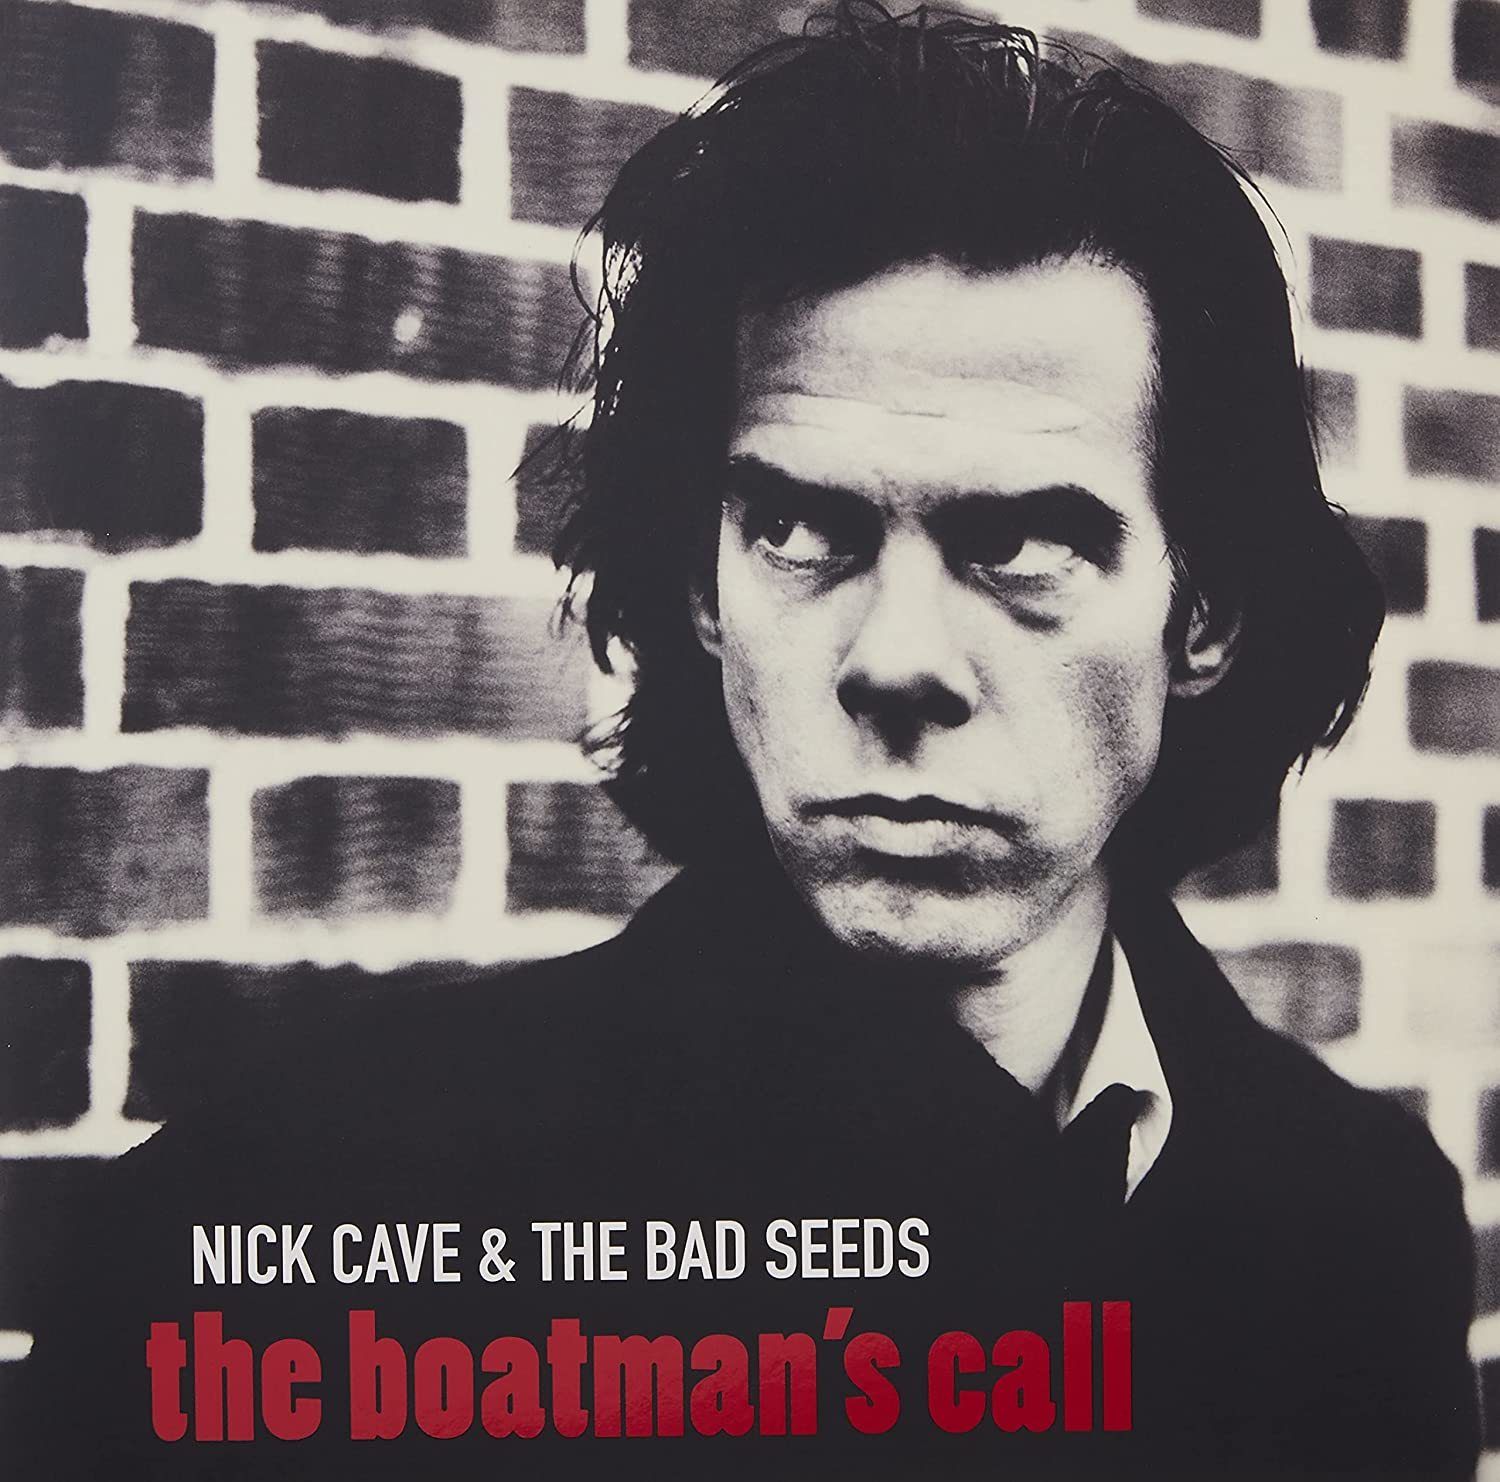 THE BOATMAN'S CALL -- NICK CAVE & THE BAD